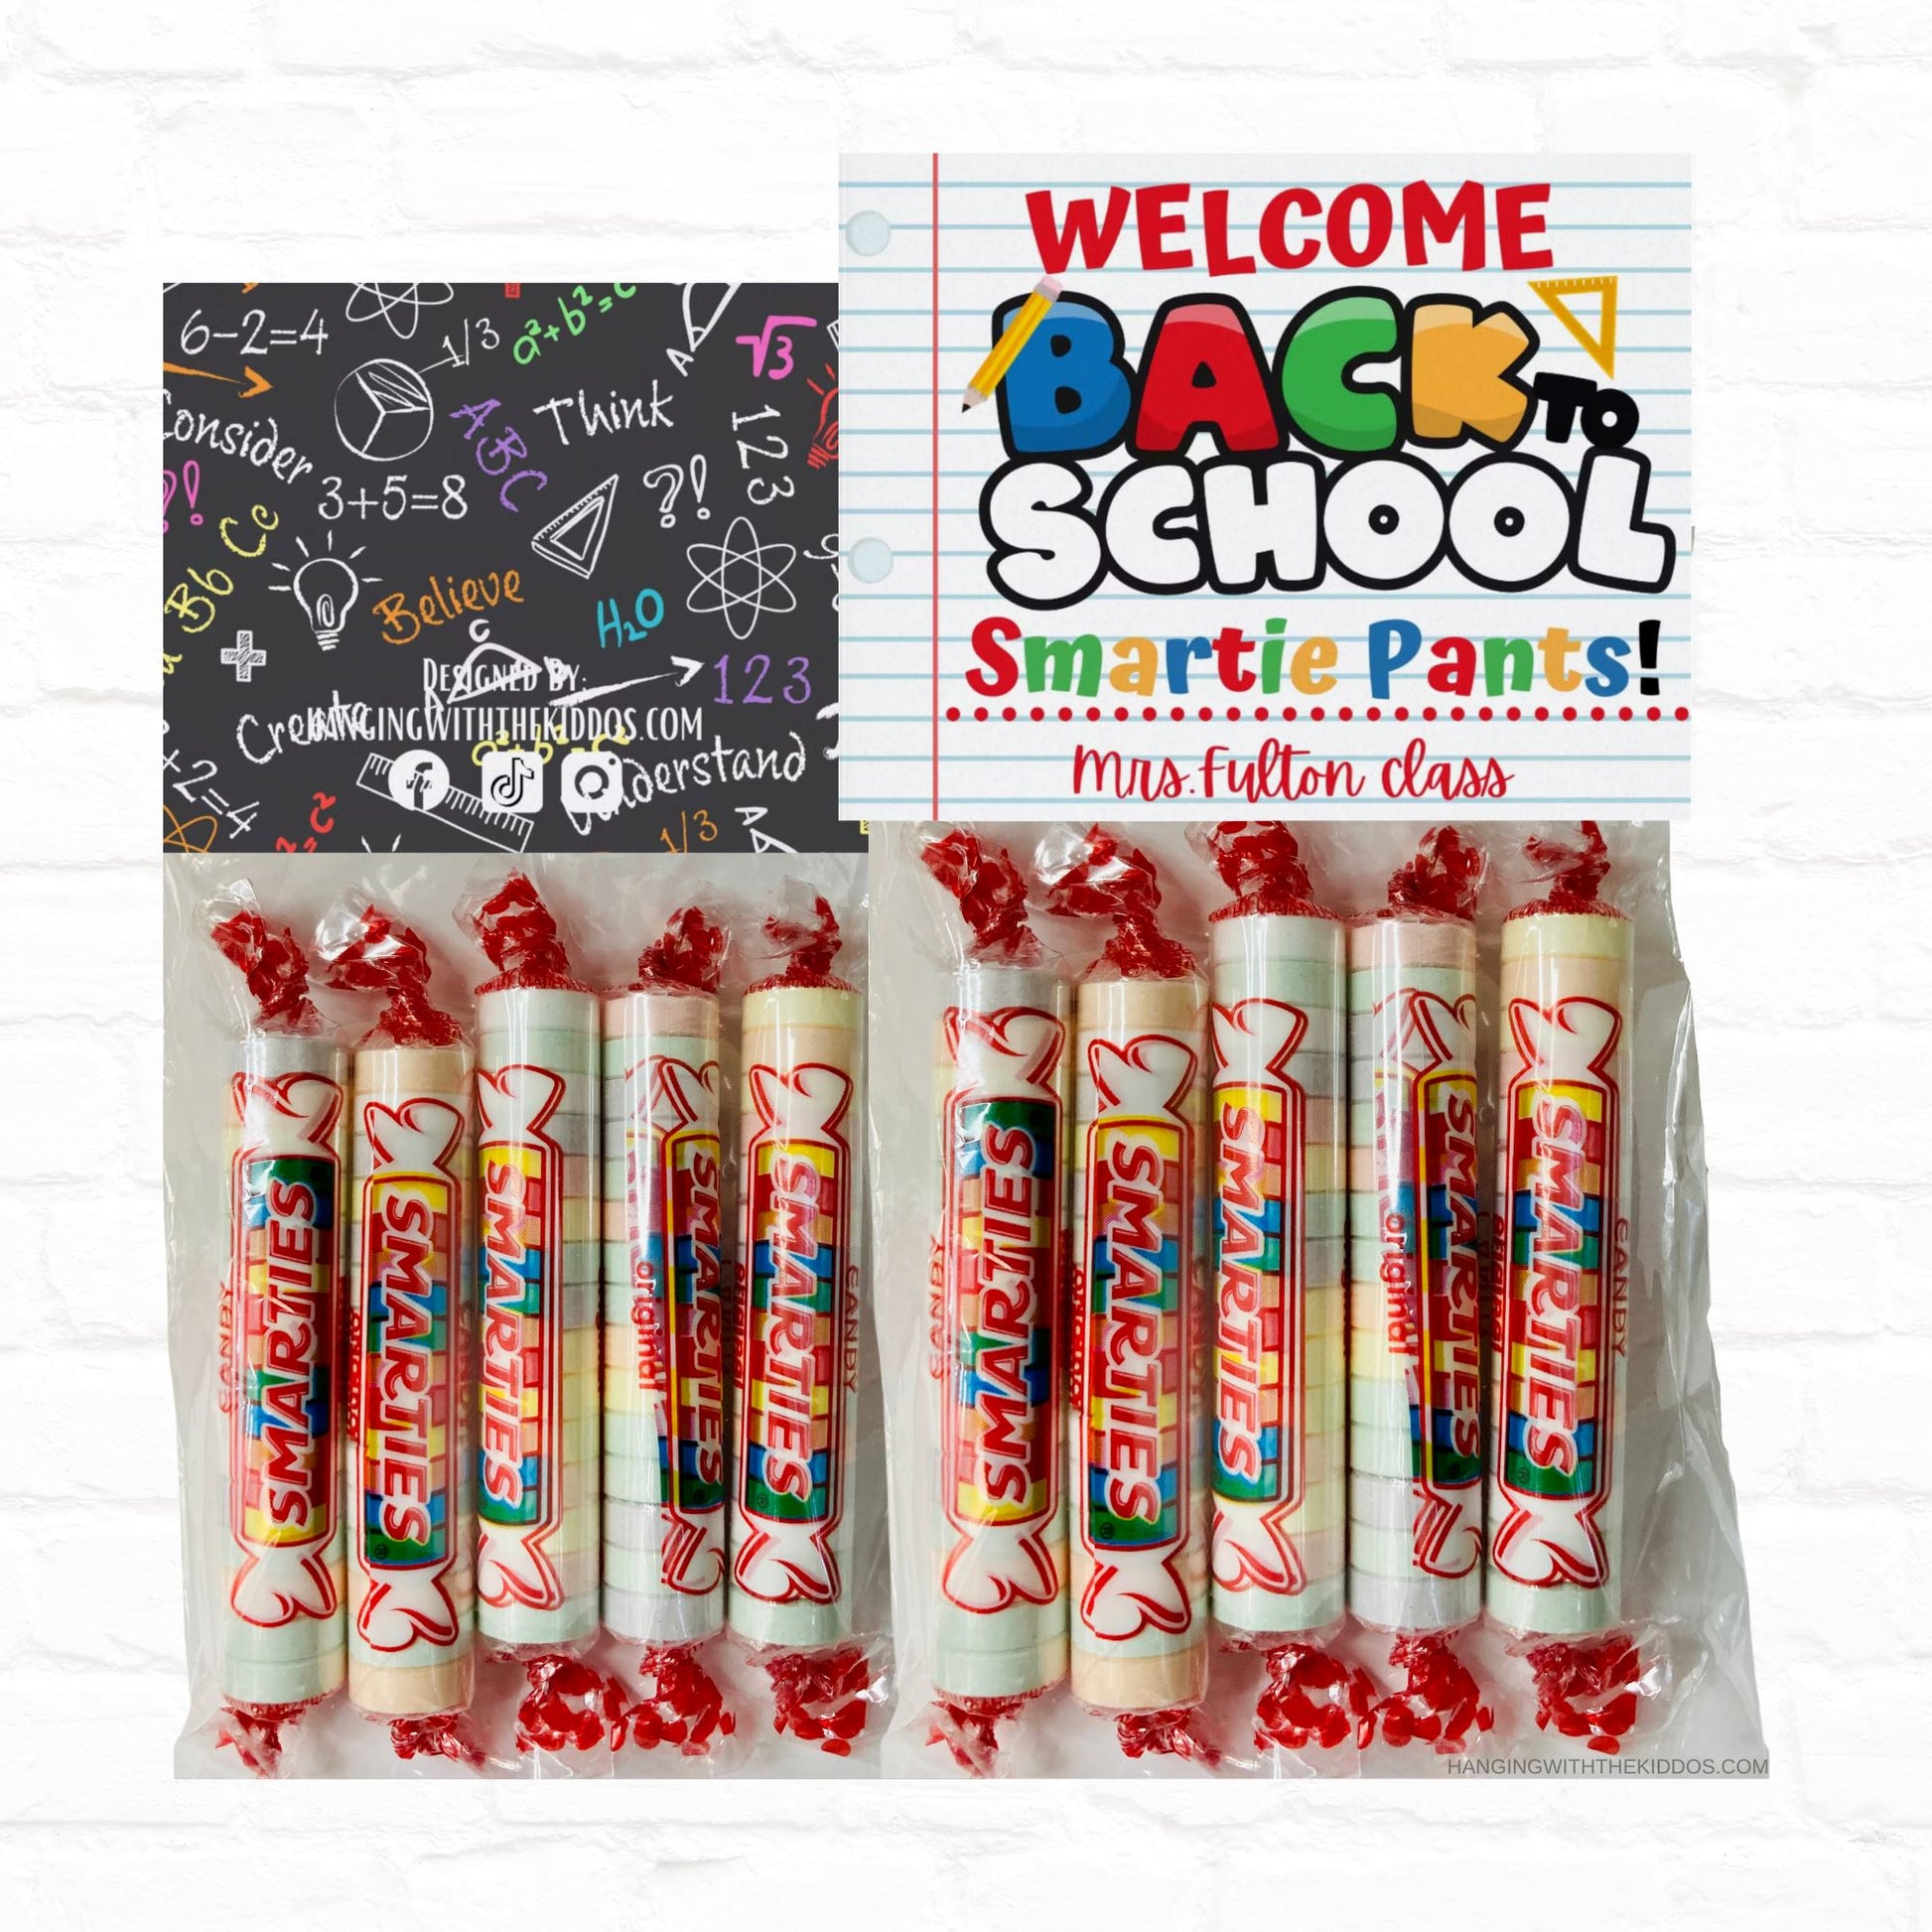 Welcome Back to School SMARTIE PANTS Bag Topper Gift from Teacher| Add to Welcome Bags or Lunch Bag | Ready to Edit Bag Toppers